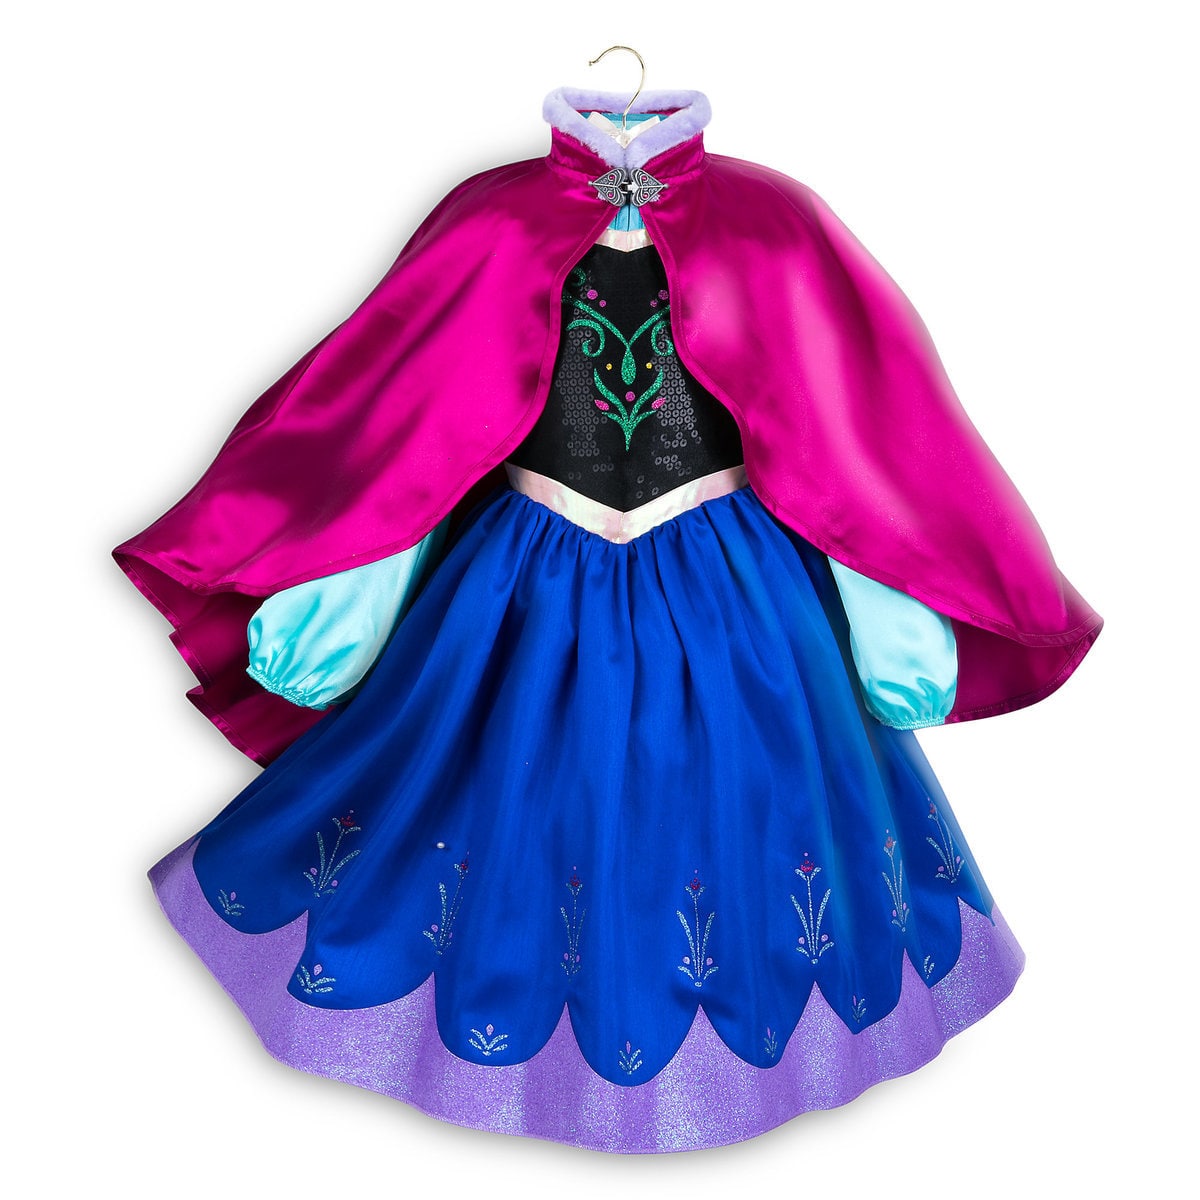 Anna costume for kids from Disney's Frozen movie | Top 25 Disney Gift Ideas for Toddlers featured by top US Disney blogger, Marcie and the Mouse